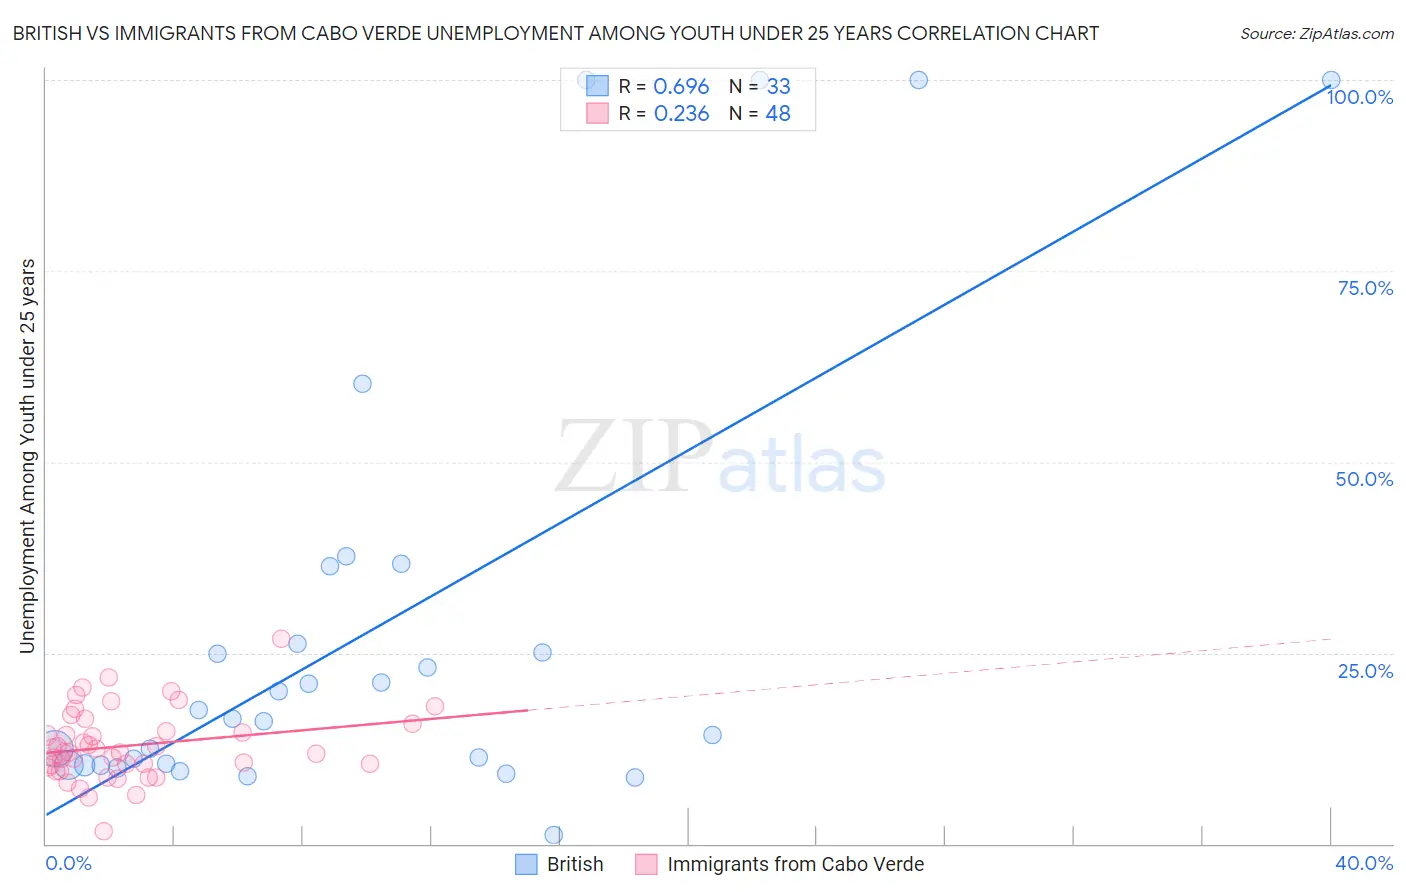 British vs Immigrants from Cabo Verde Unemployment Among Youth under 25 years